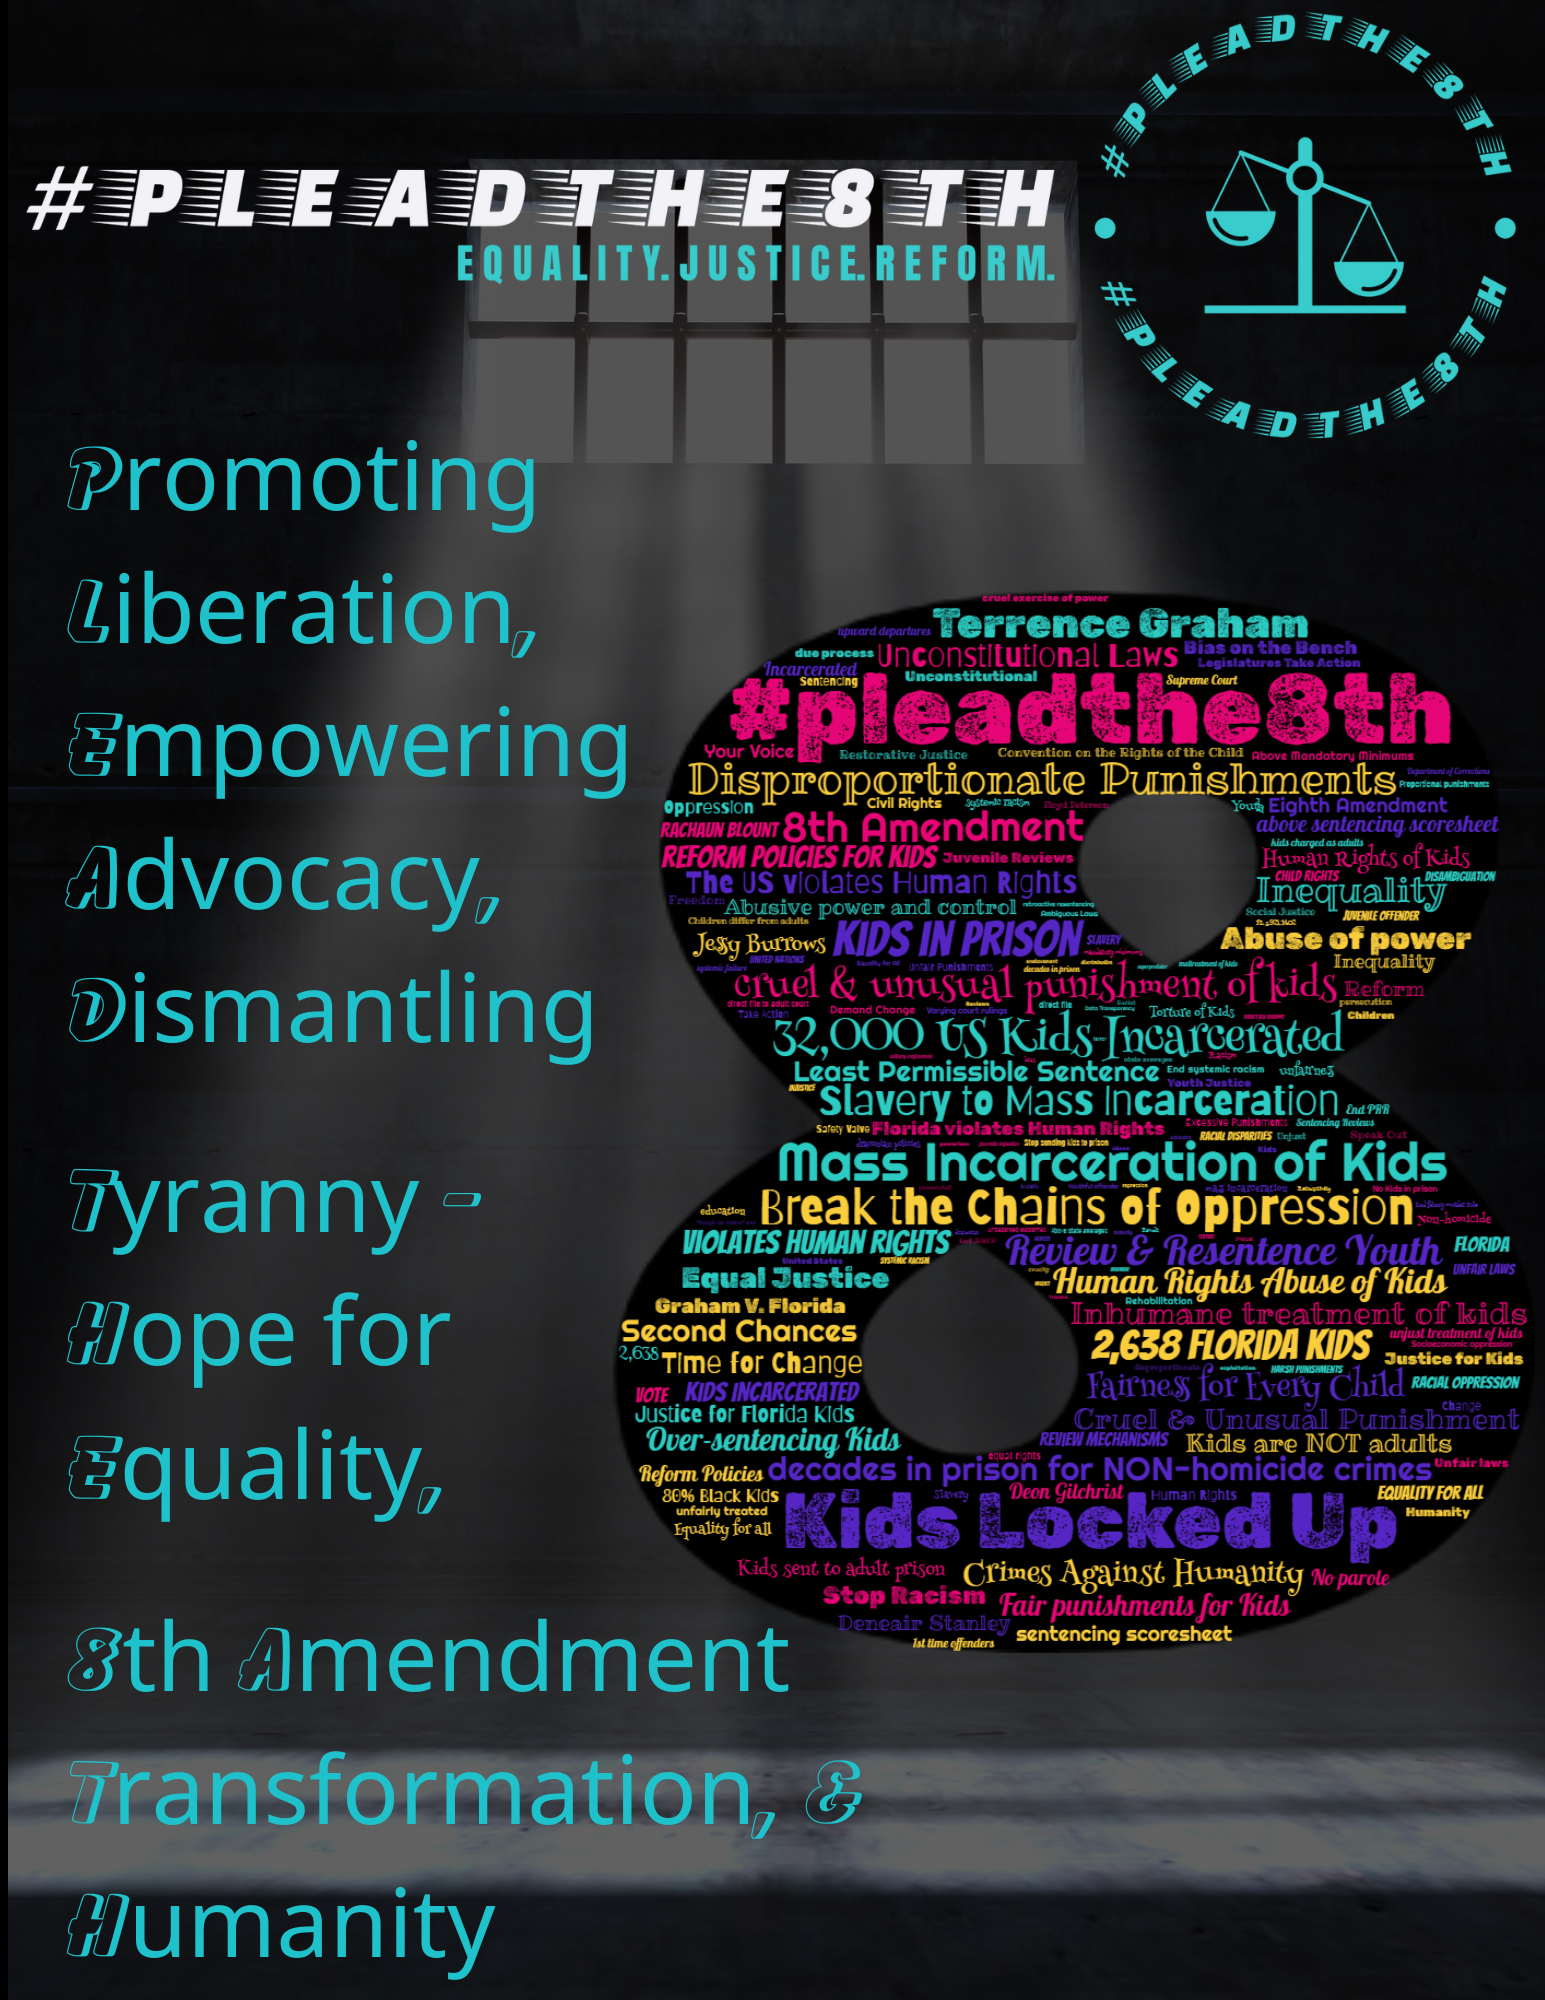 PleadThe8th Promoting Liberatino, Empowering Advocacy, Dismantling Tyranny- Hope for Equality, and 8th Amendment Transformation & Humanity